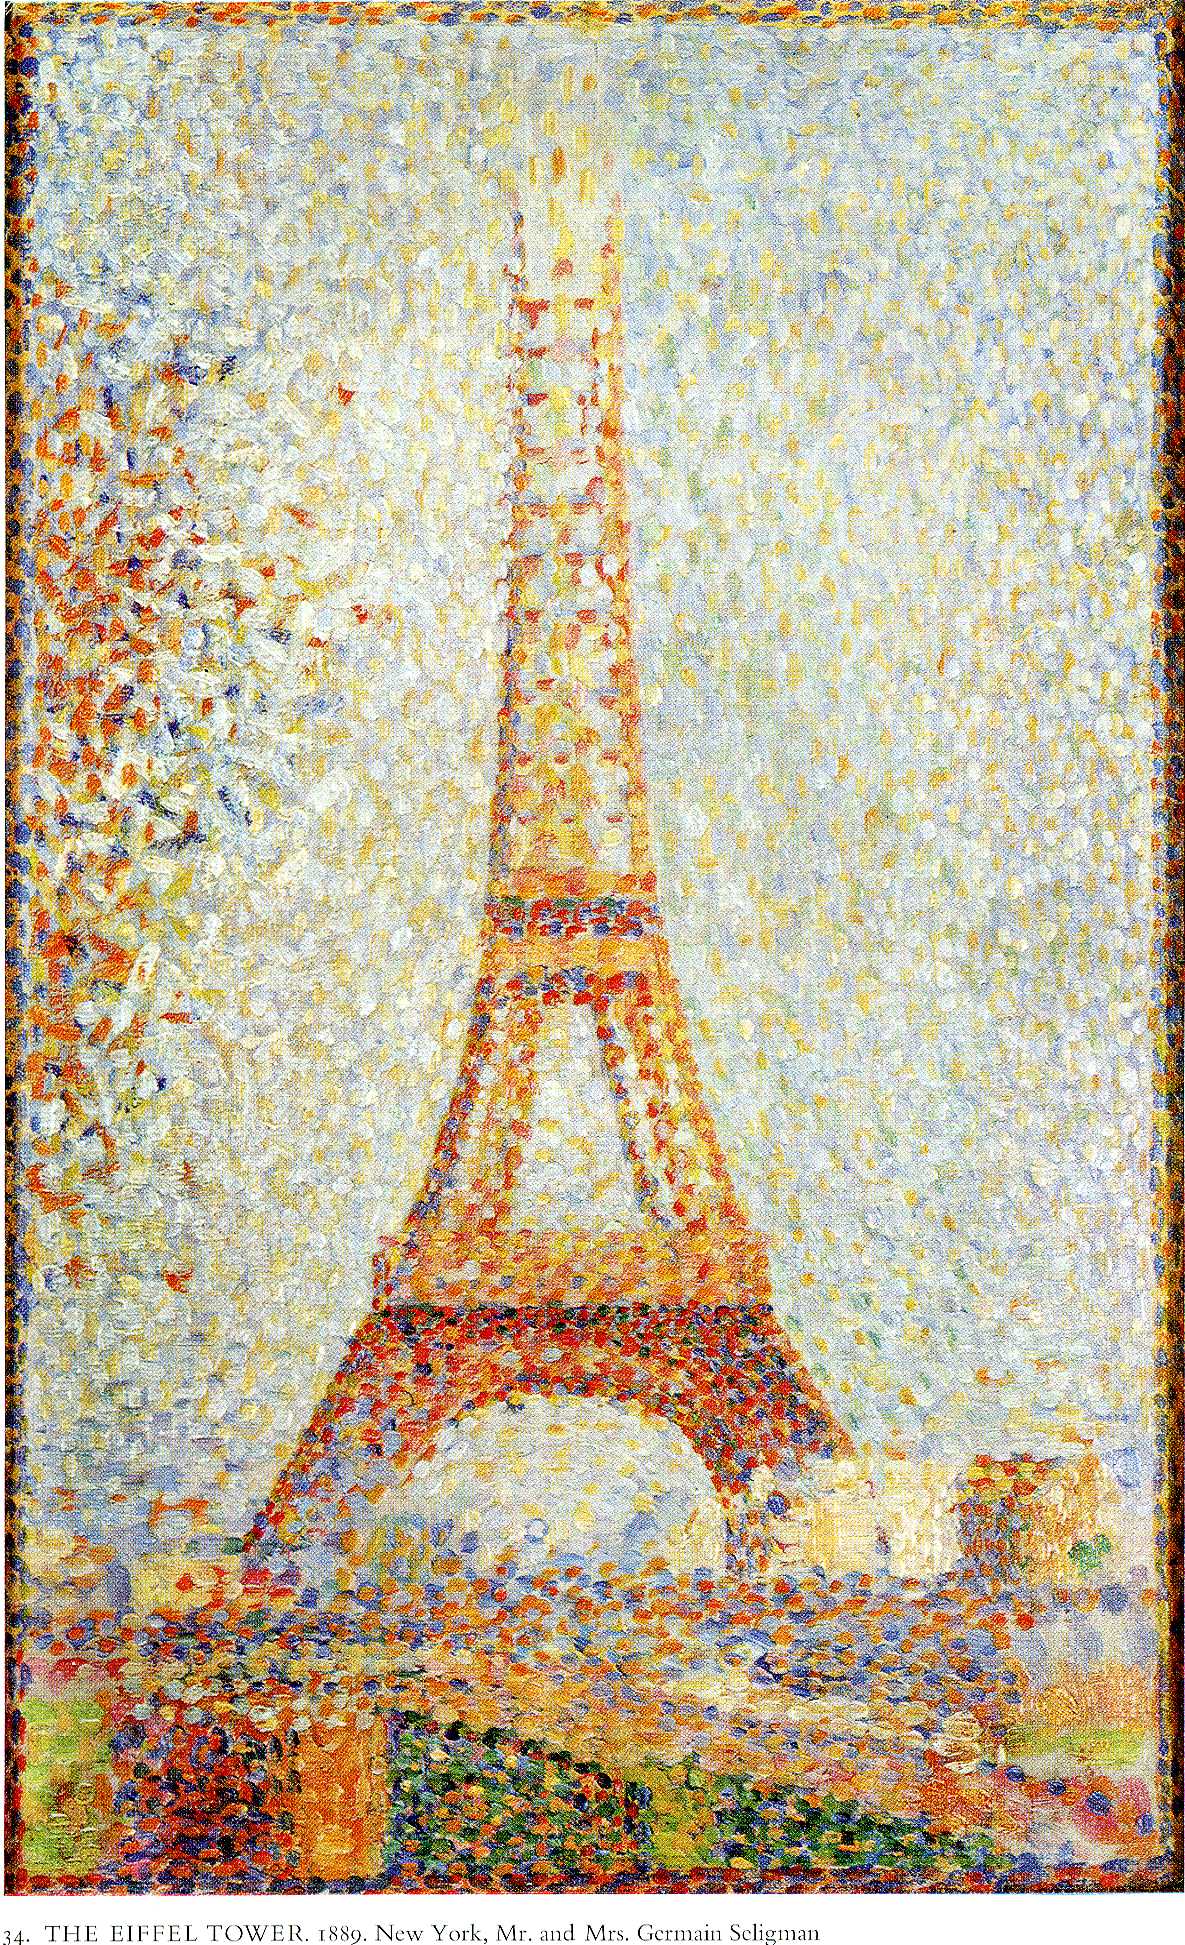 The Eiffel Tower, 1889 - Georges Seurat - WikiArt.org